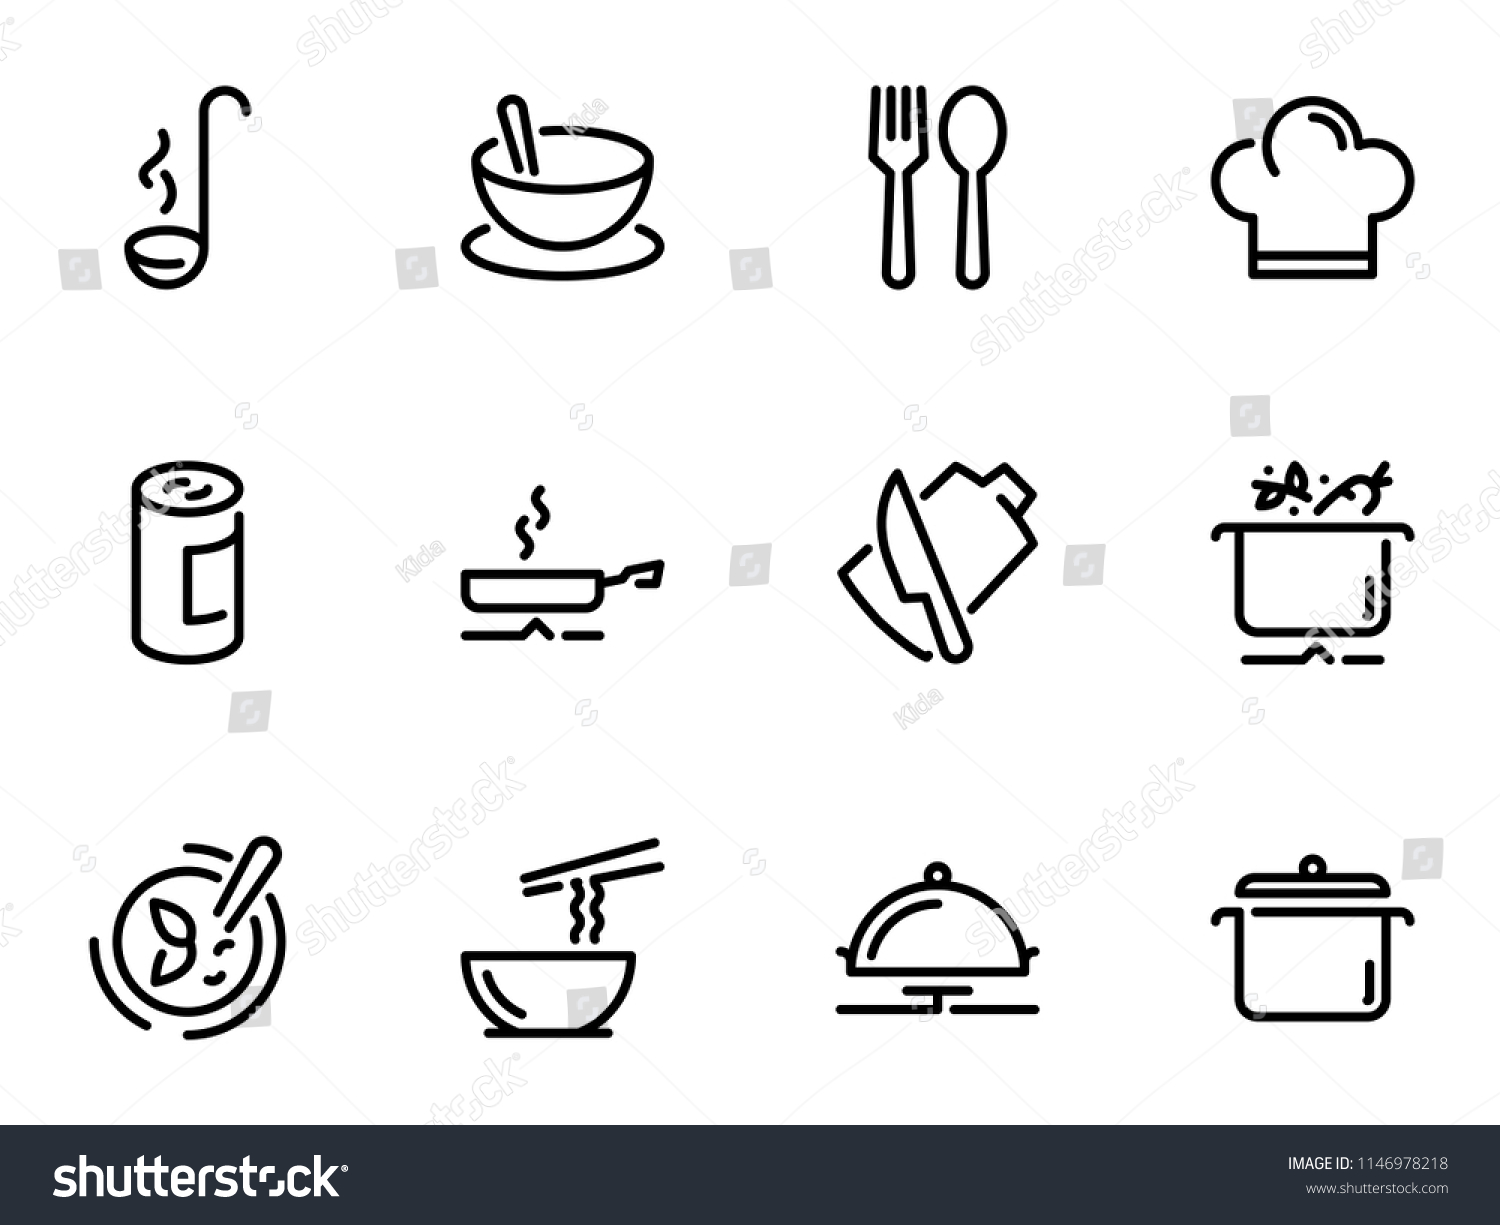 Set of black vector icons, isolated on white background, on theme Preparation of ingredients for cooking soup, hat, knife, fork, chef, cup. Line, outline, stroke #1146978218